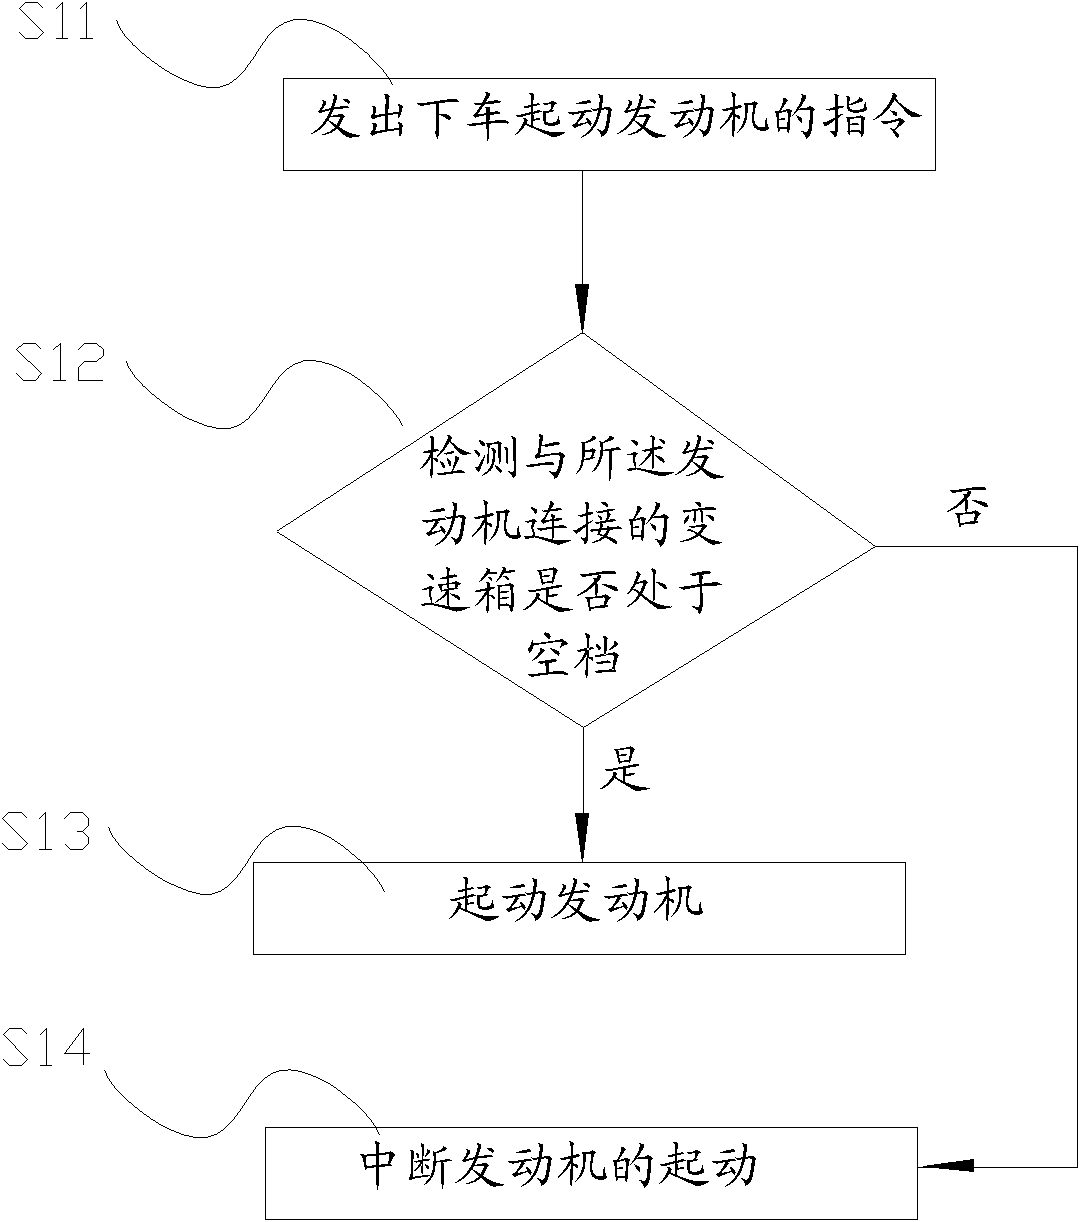 Crane as well as startup controlling method and system thereof